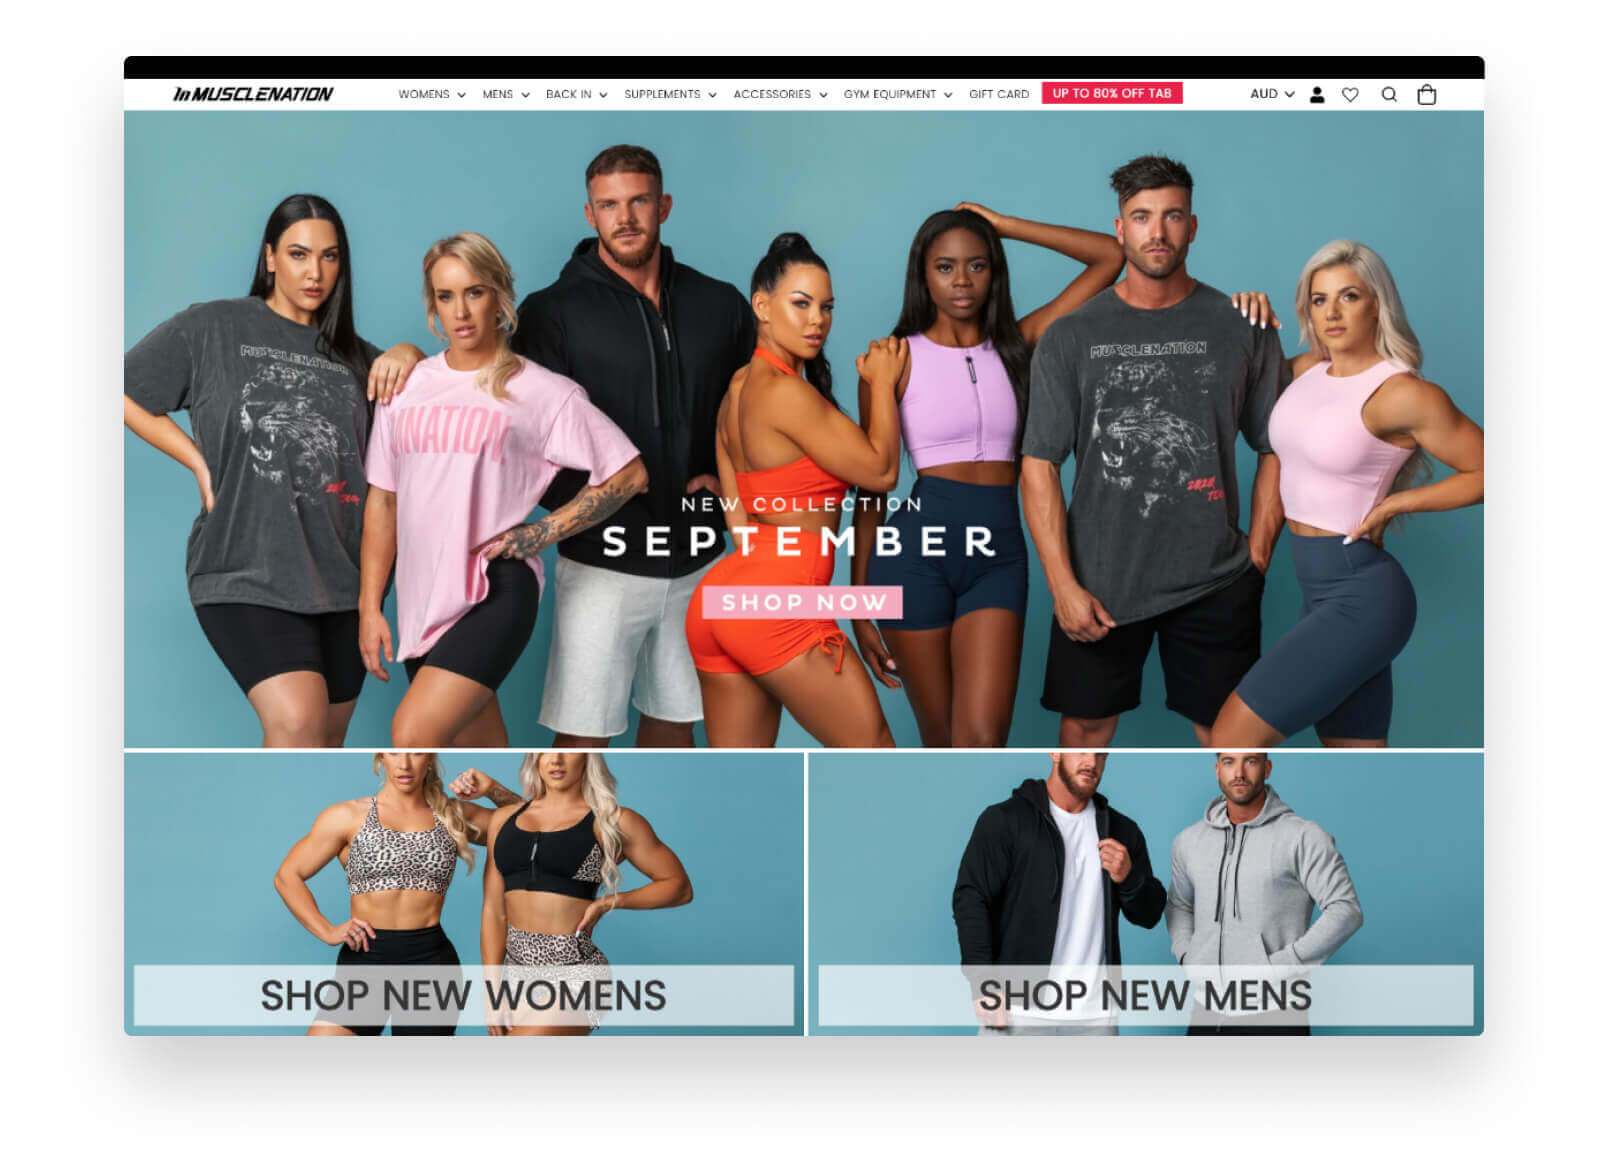 Desktop view of the Muscle Nation online store.